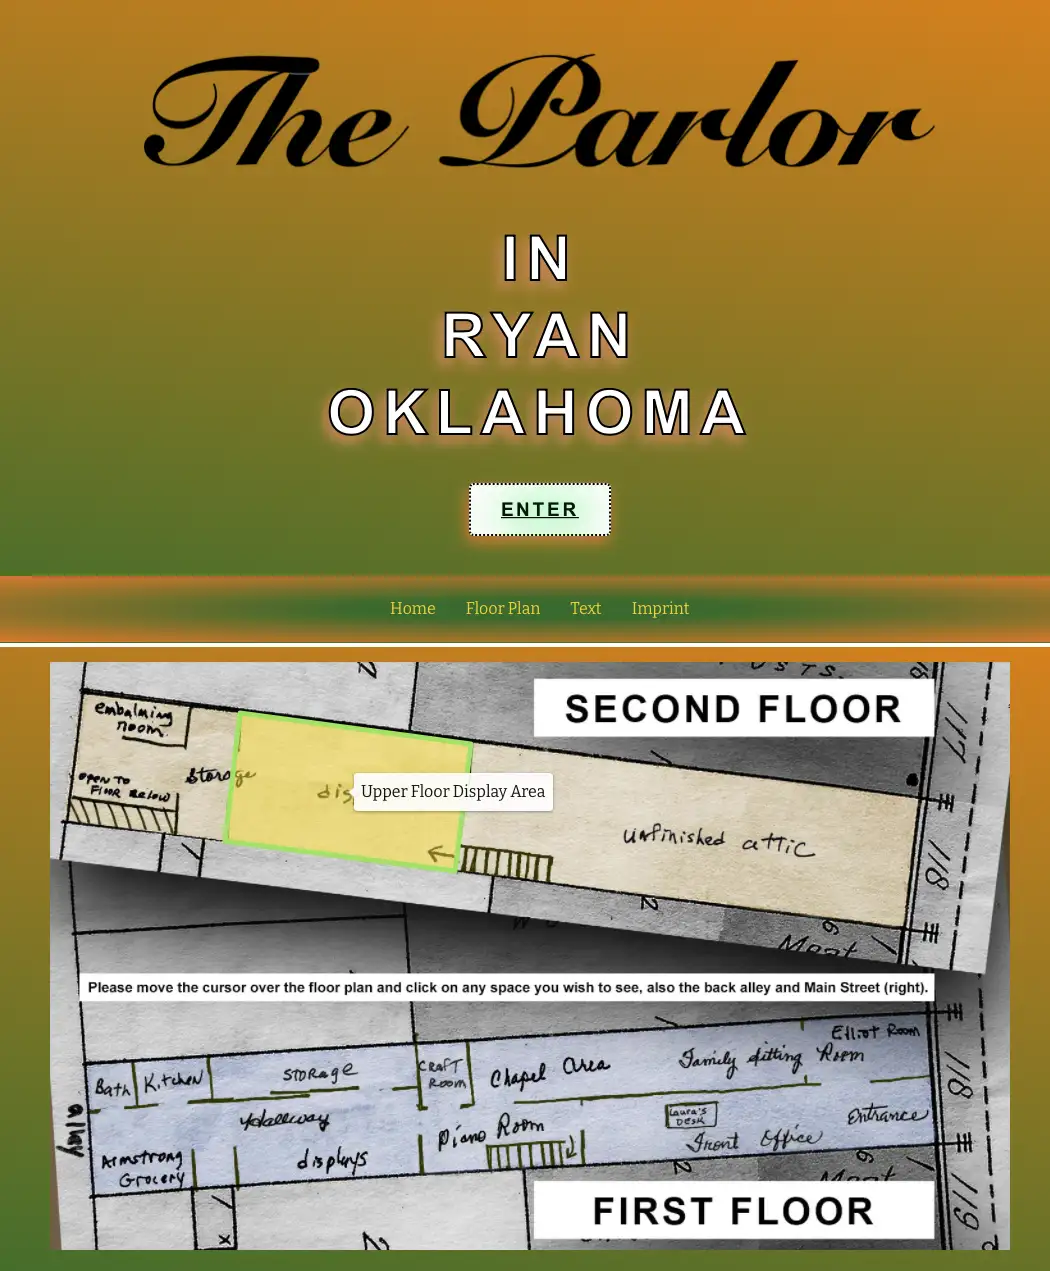 Screenshots of the website for The Parlour in Ryan, Oklahoma